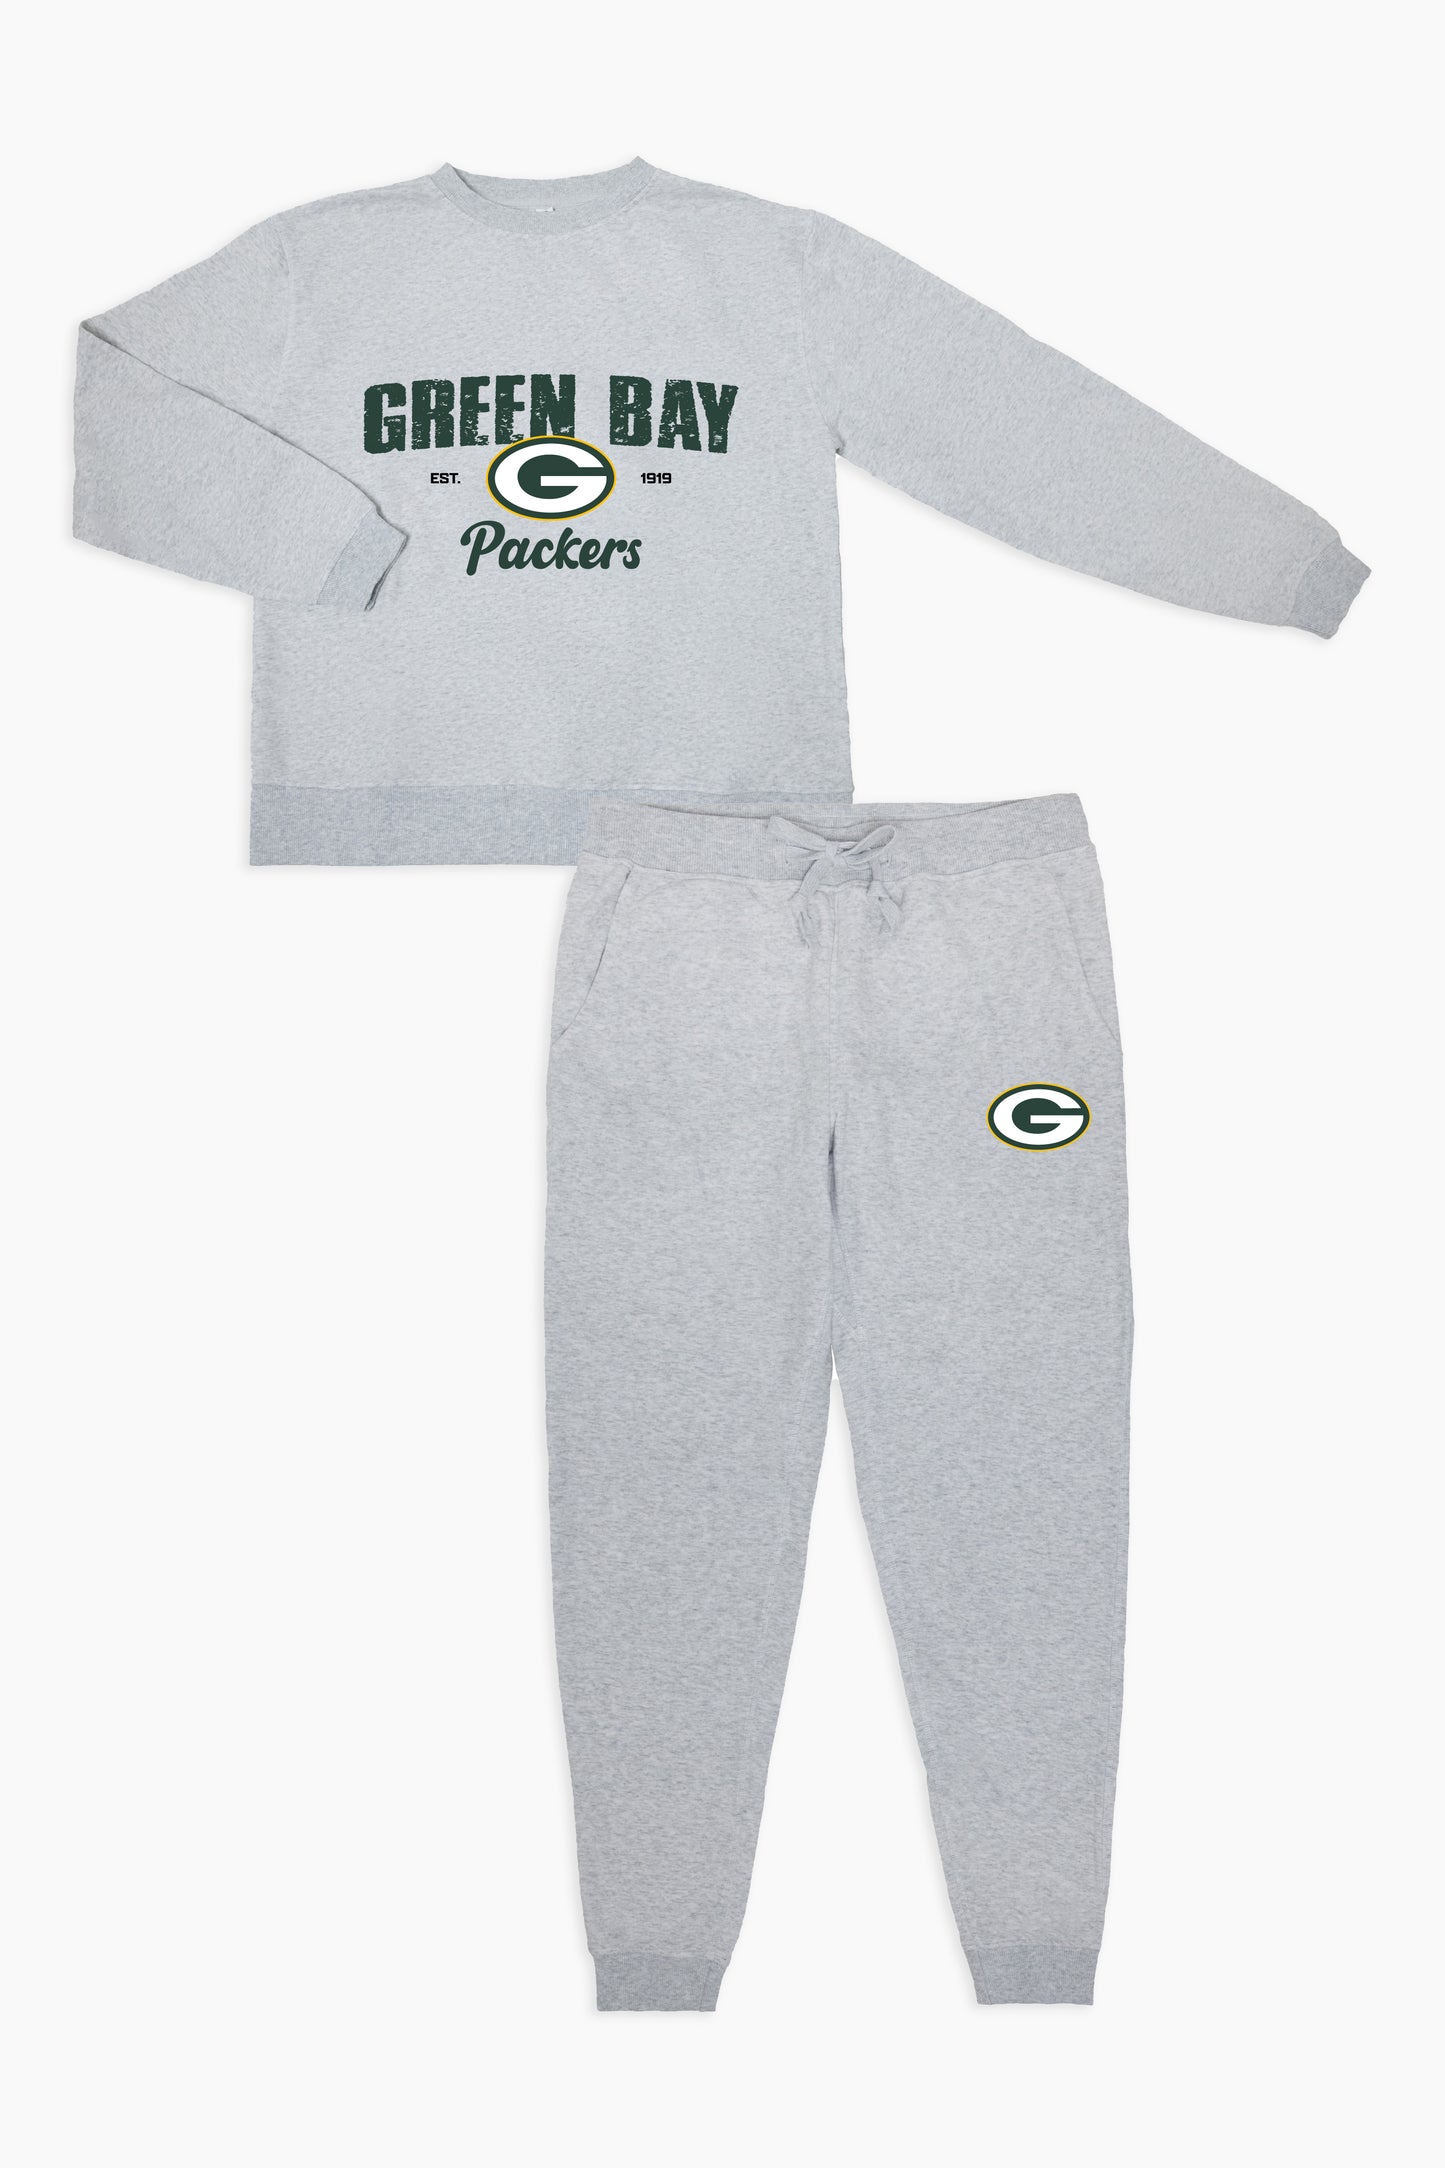 Green Bay Packers Grey French Terry Pajamas